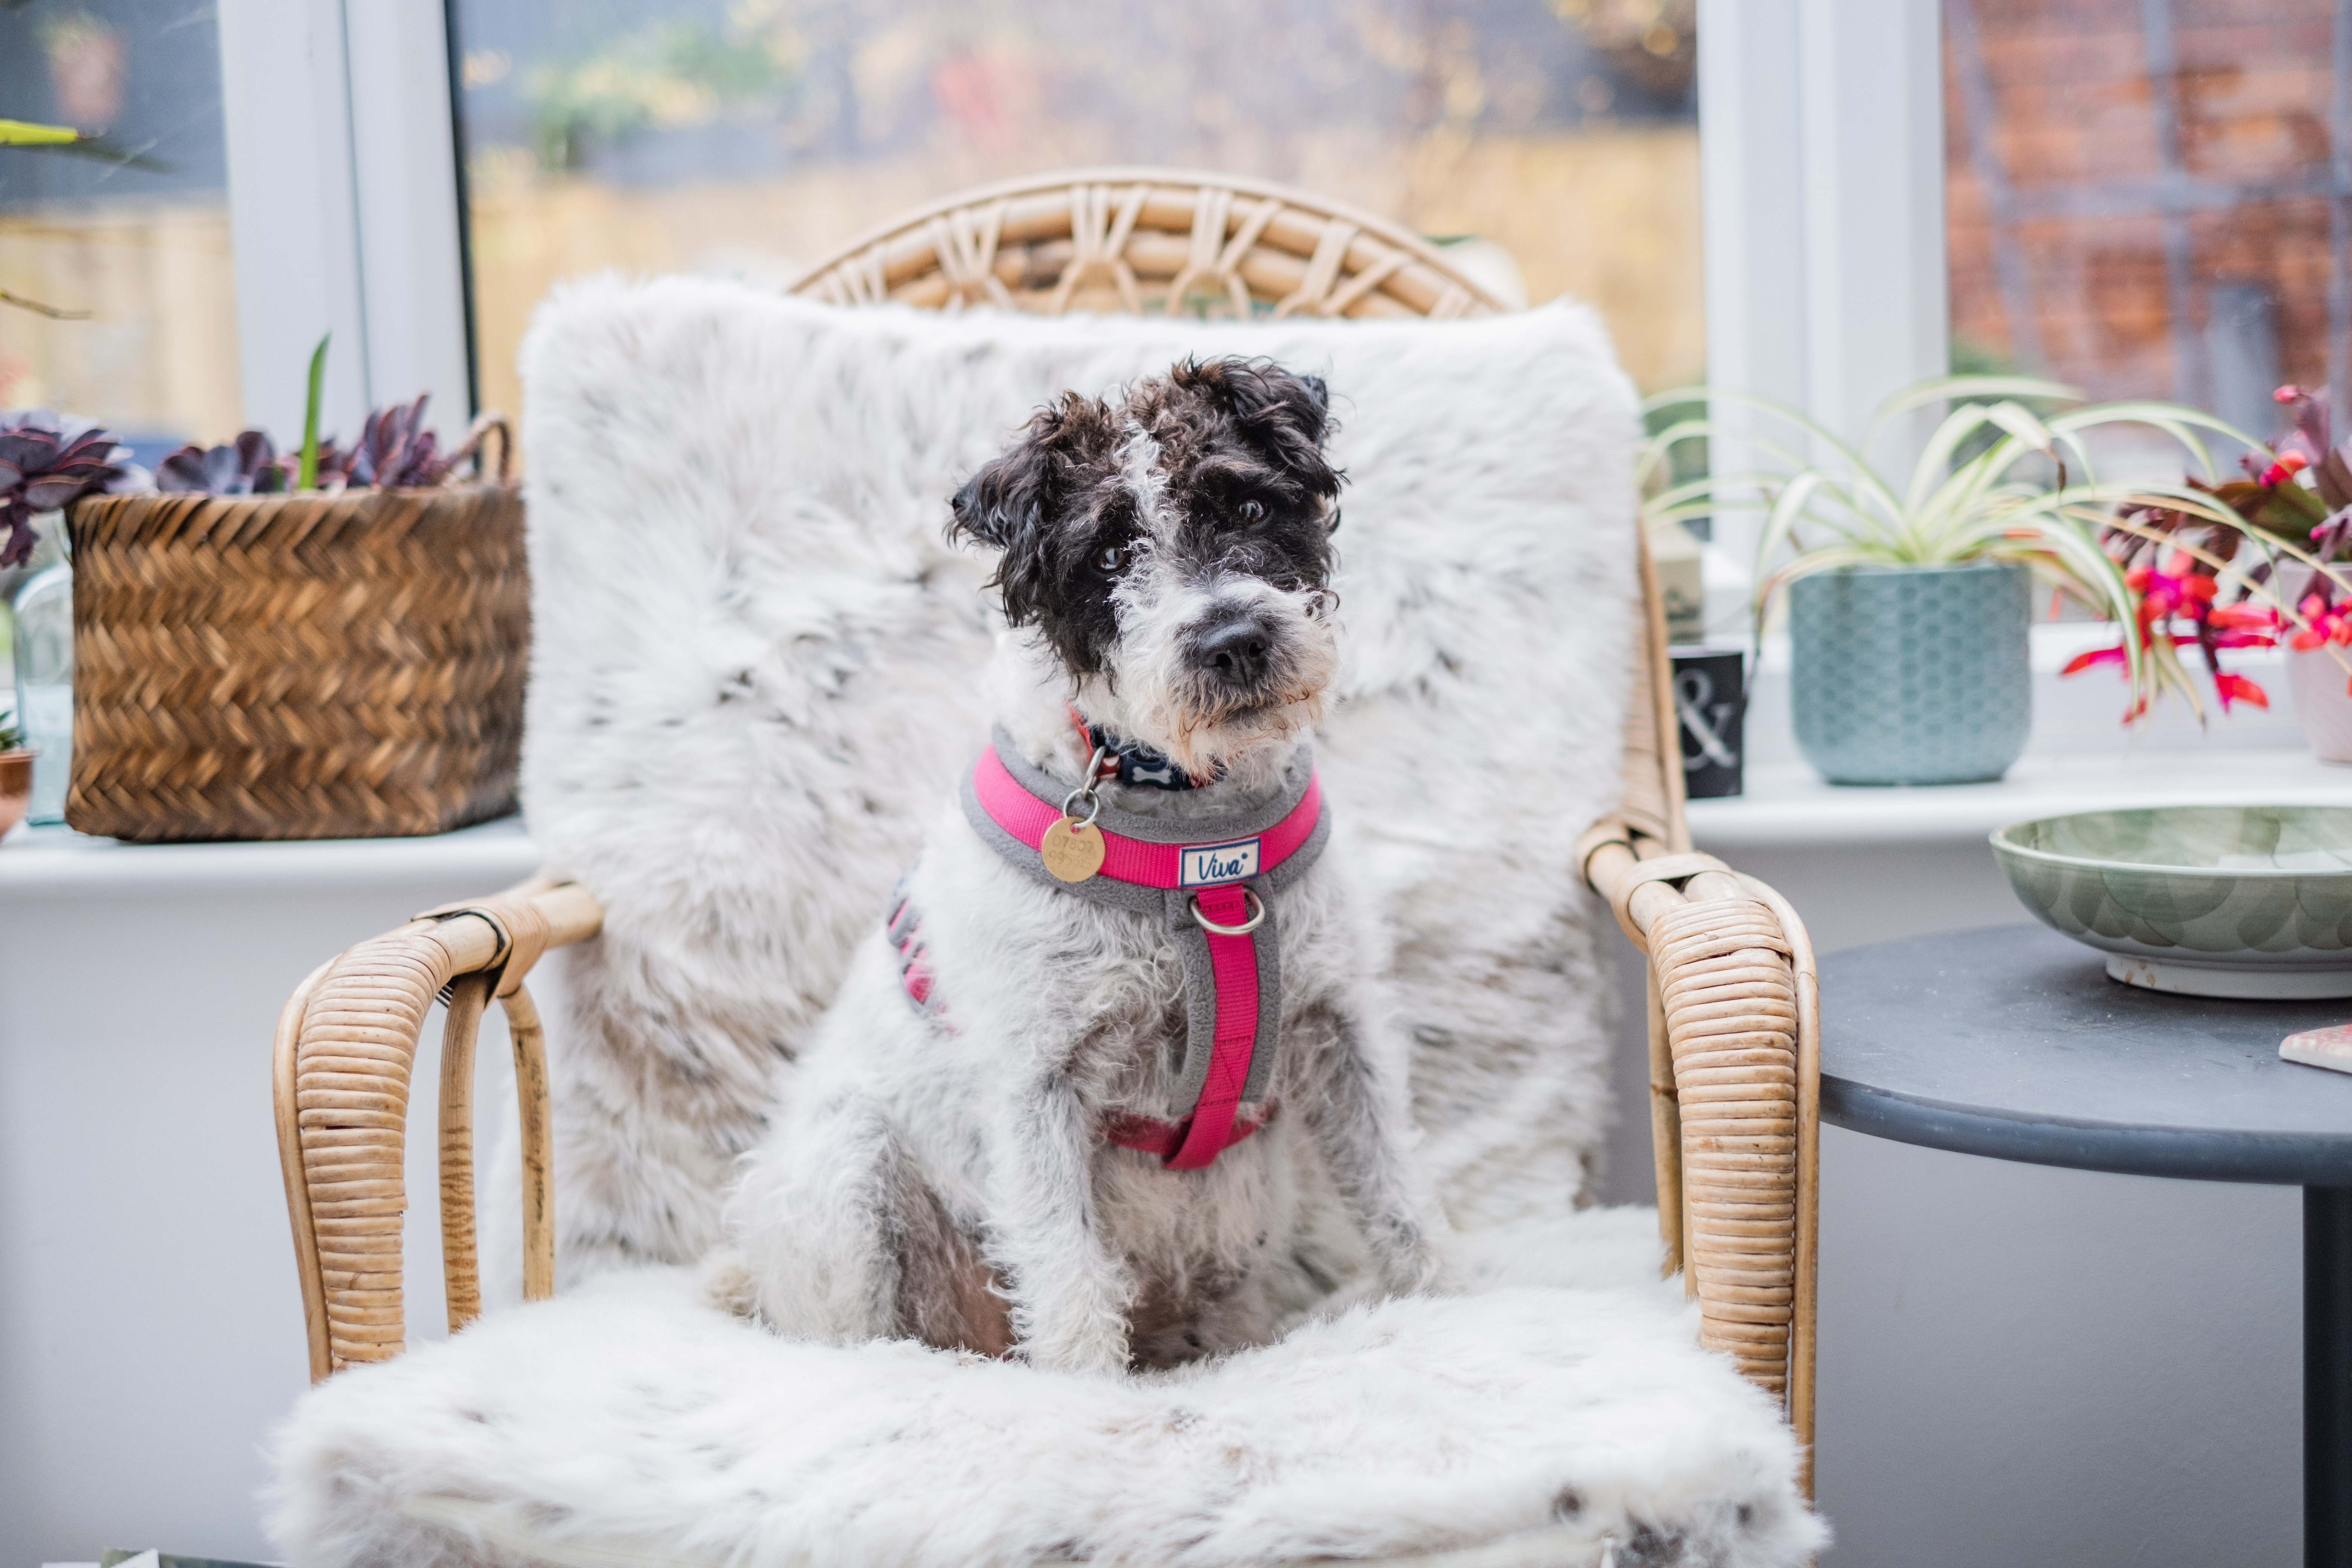 Black and white terrier Rosie sits on a fluffy cushion on a wooden wicker chair gazing into the camera